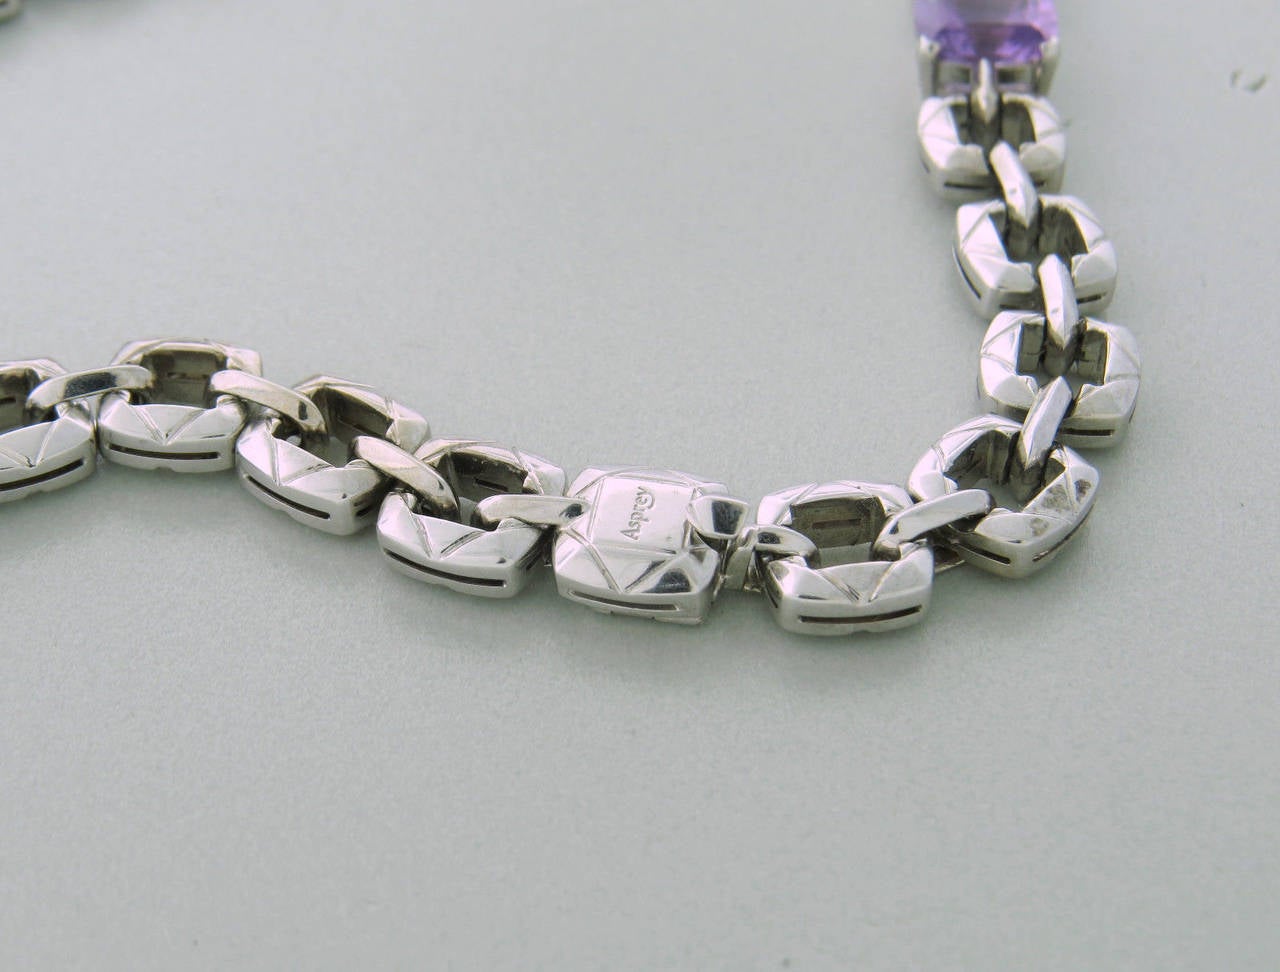 An 18K white gold necklace features topaz, amethyst and tourmaline. Necklace is 16 3/4